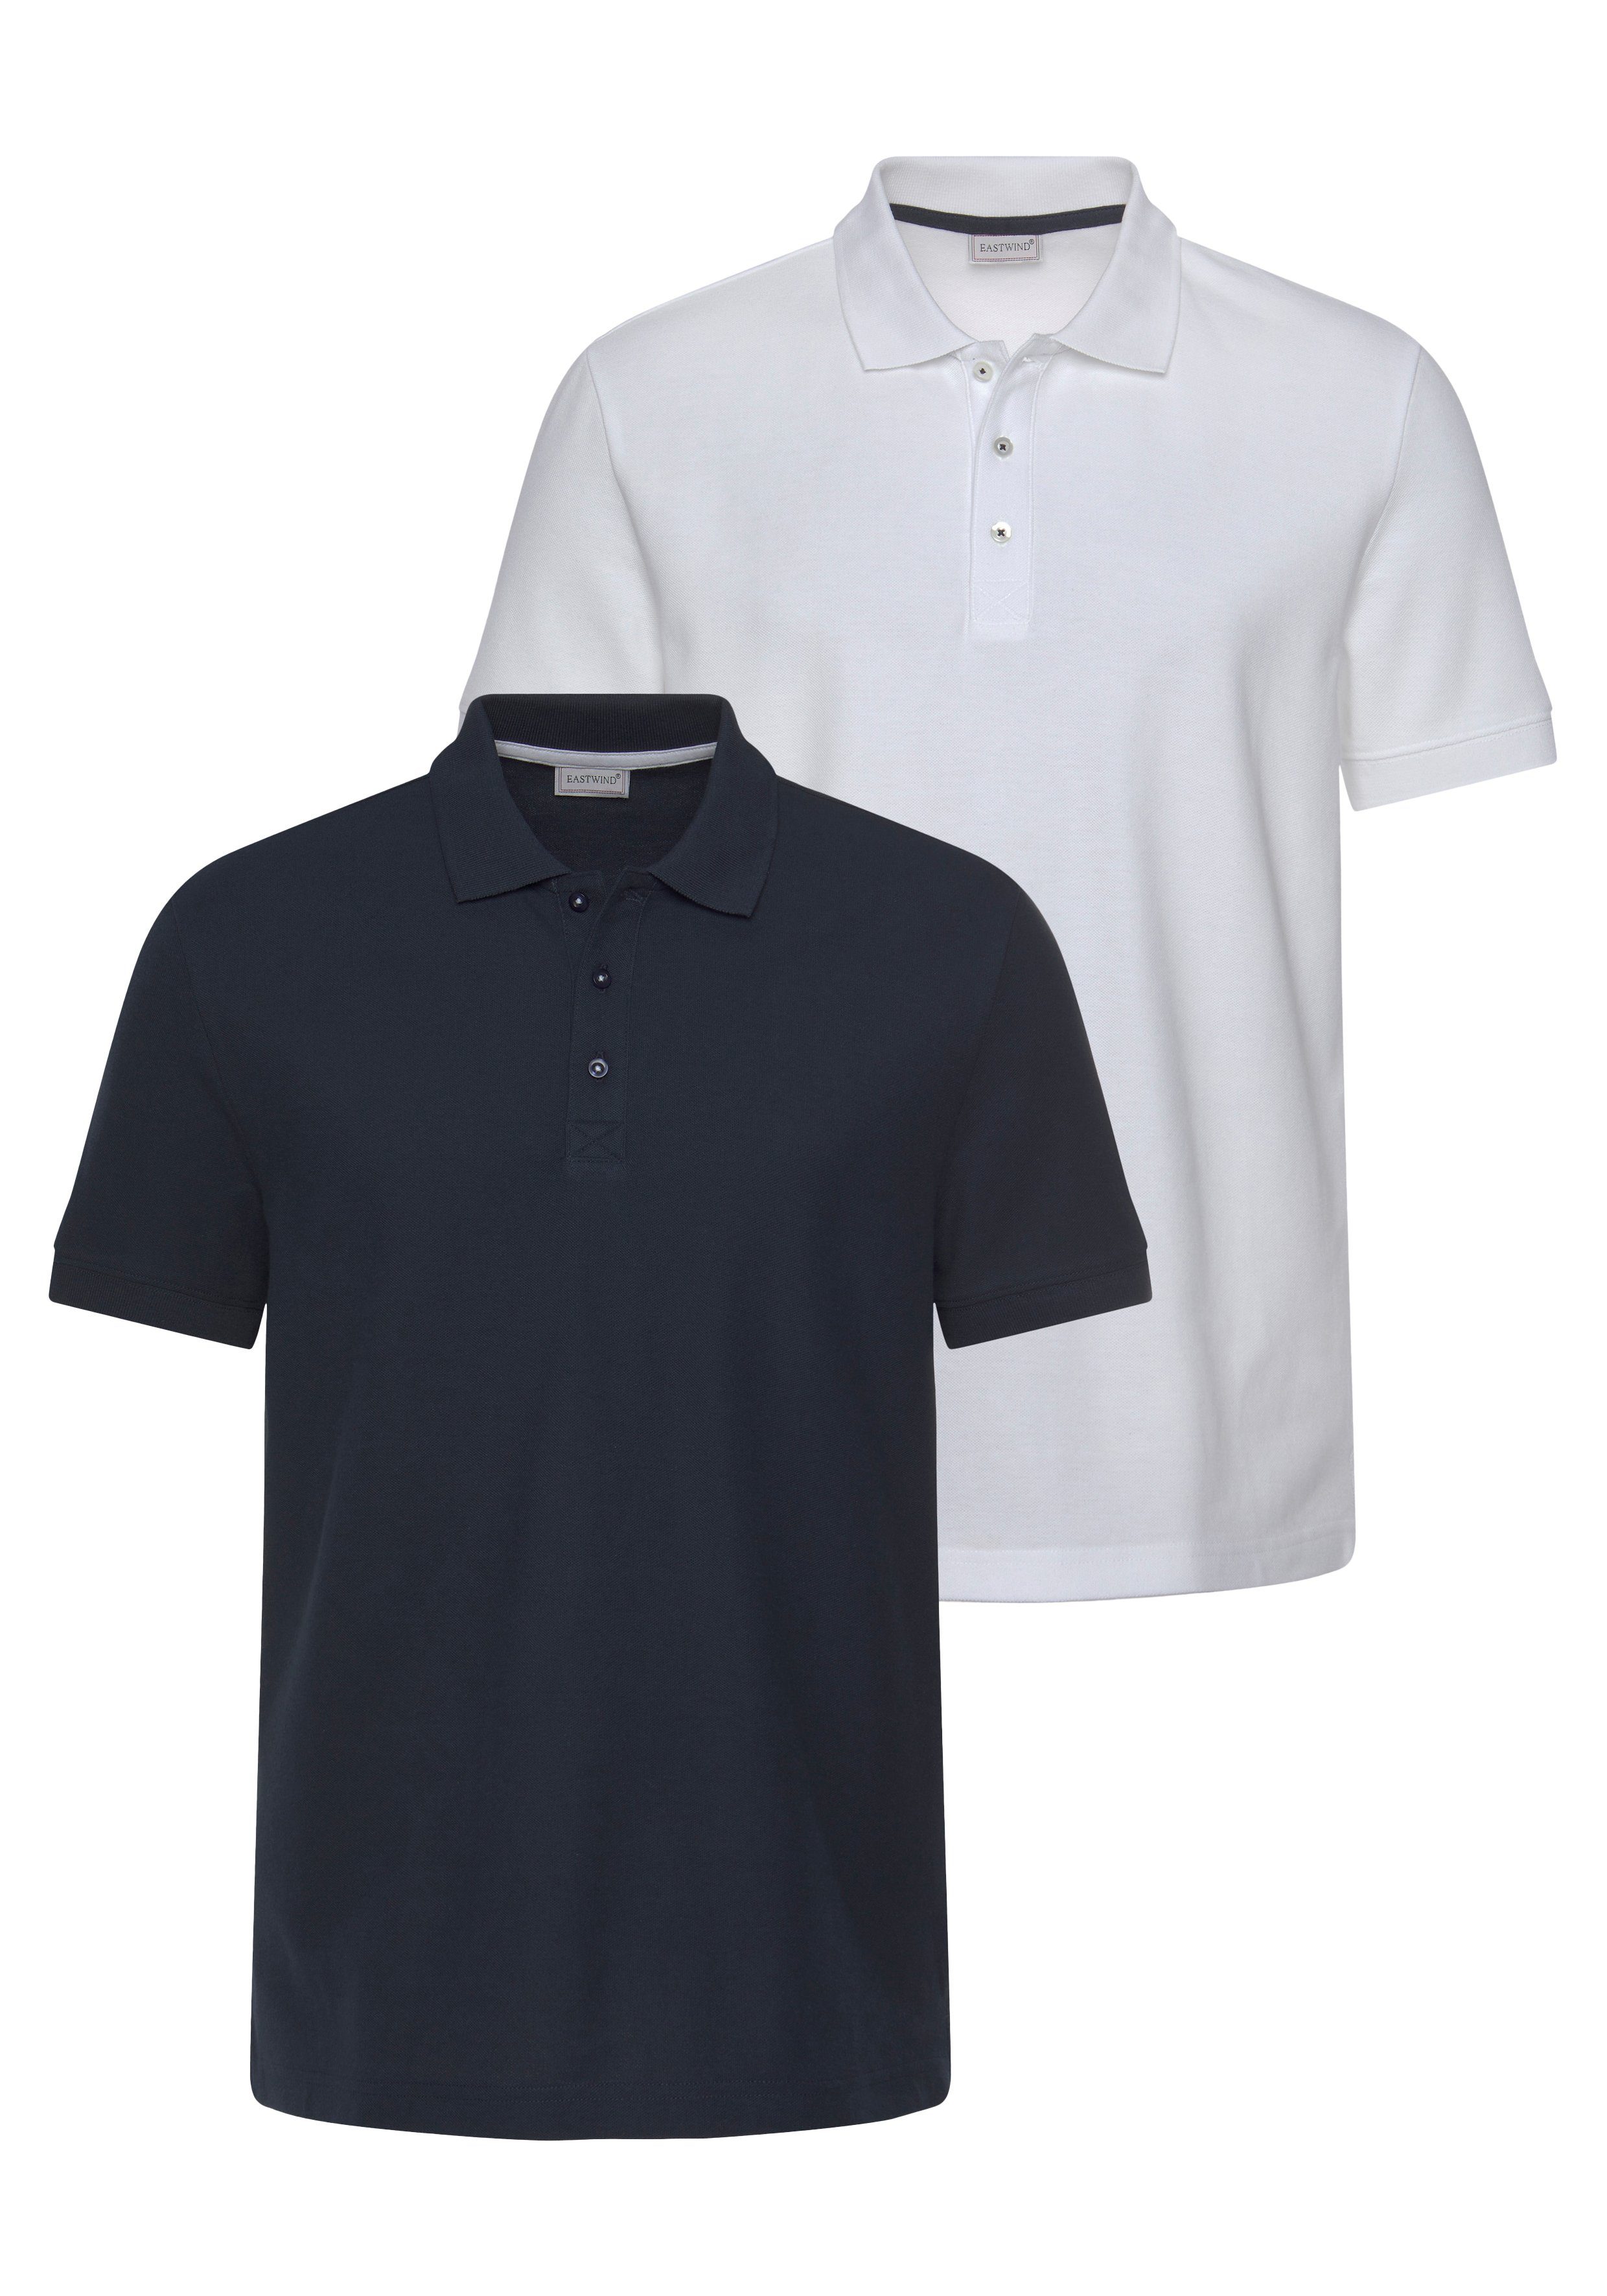 (2er-Pack) Eastwind Double Polo, Pack Poloshirt navy+white marine-weiß